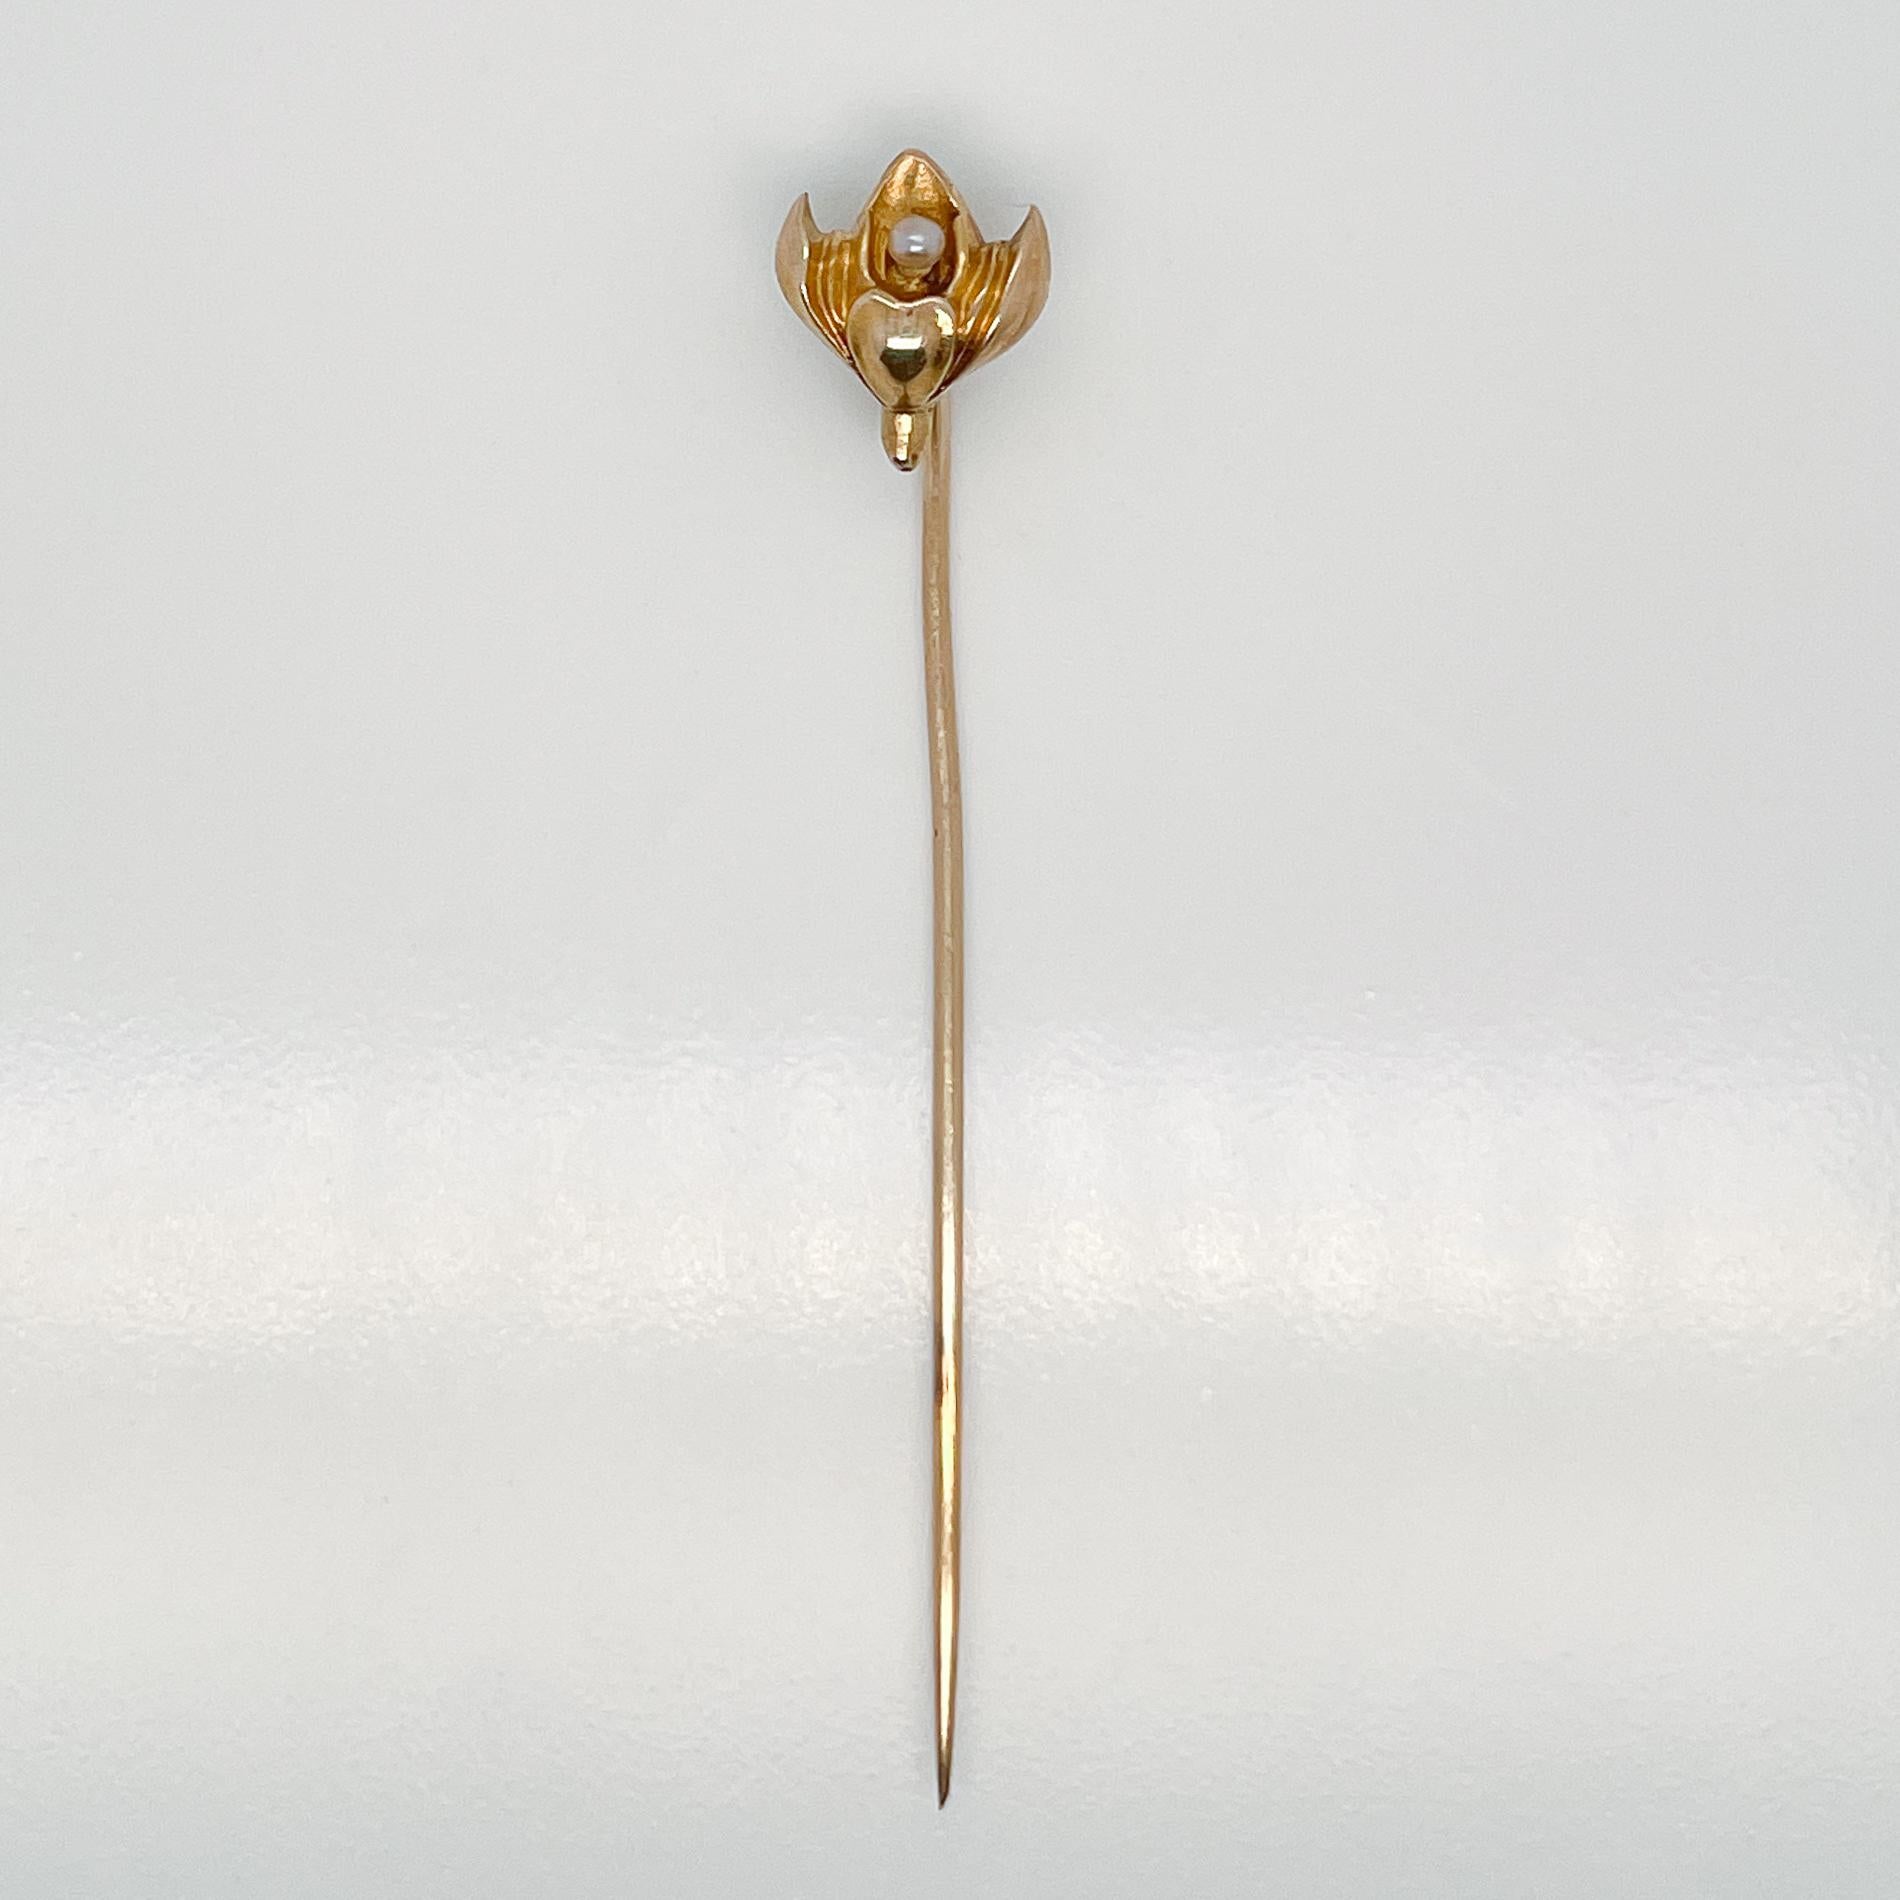 A very fine Late Victorian 10k gold & seed pearl stick pin.

With a lotus shaped flower that has a small white round seed pearl set at its center.

Simply a great stickpin!

Date:
19th Century

Overall Condition: 
It is in overall good, as-pictured,